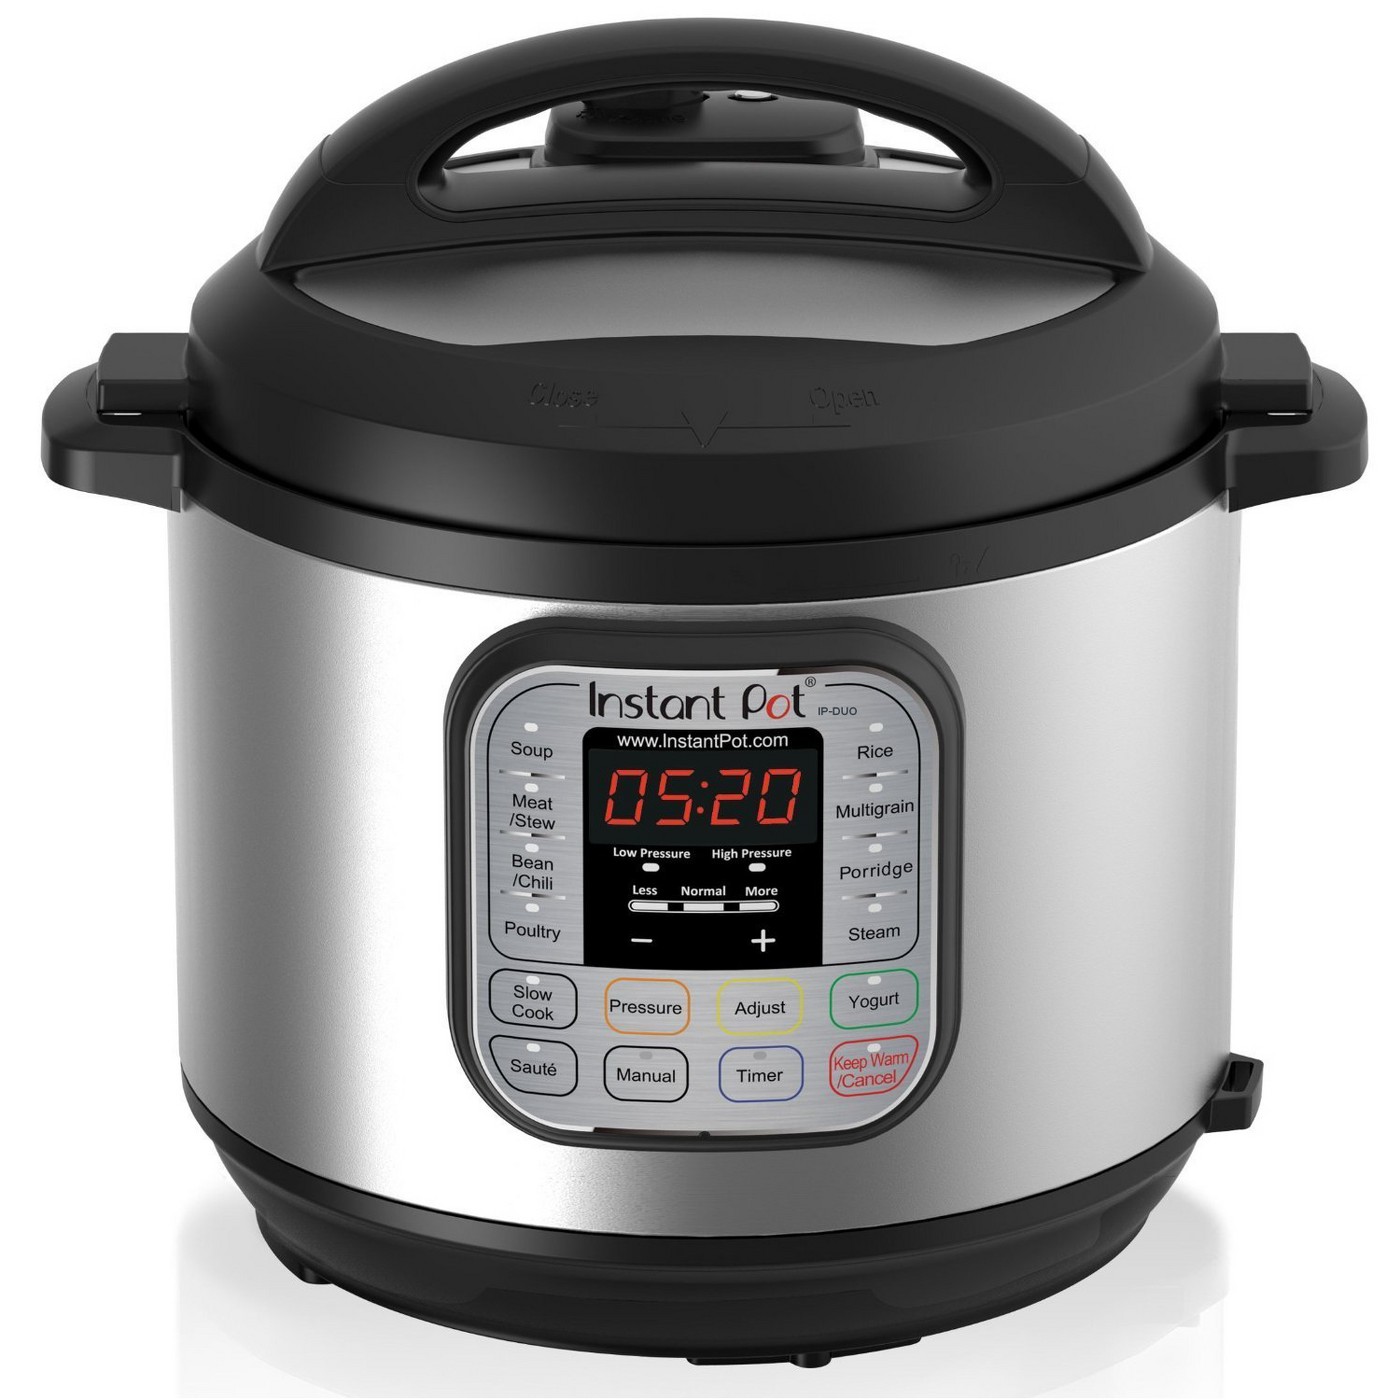 Instant Pot Duo 6qt 7-in-1 Pressure Cooker - image 1 of 5